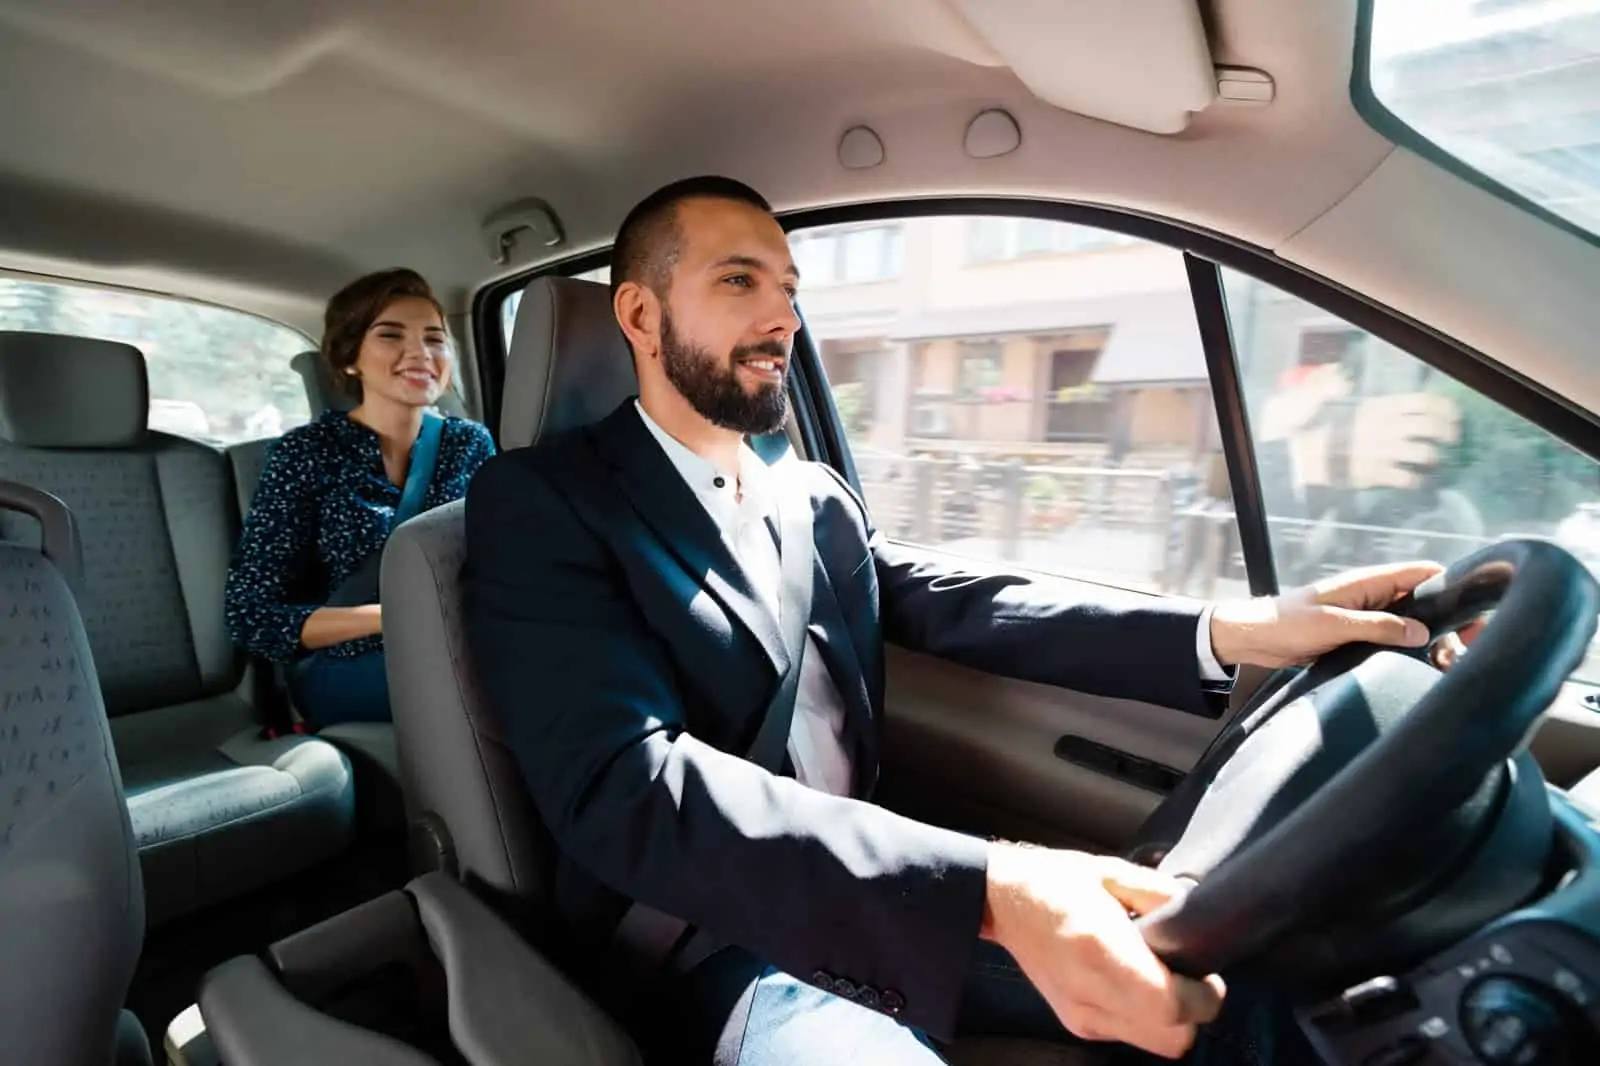 Drive for Lyft: A well-dressed man in the driver's seat with a passenger in the seat behind him